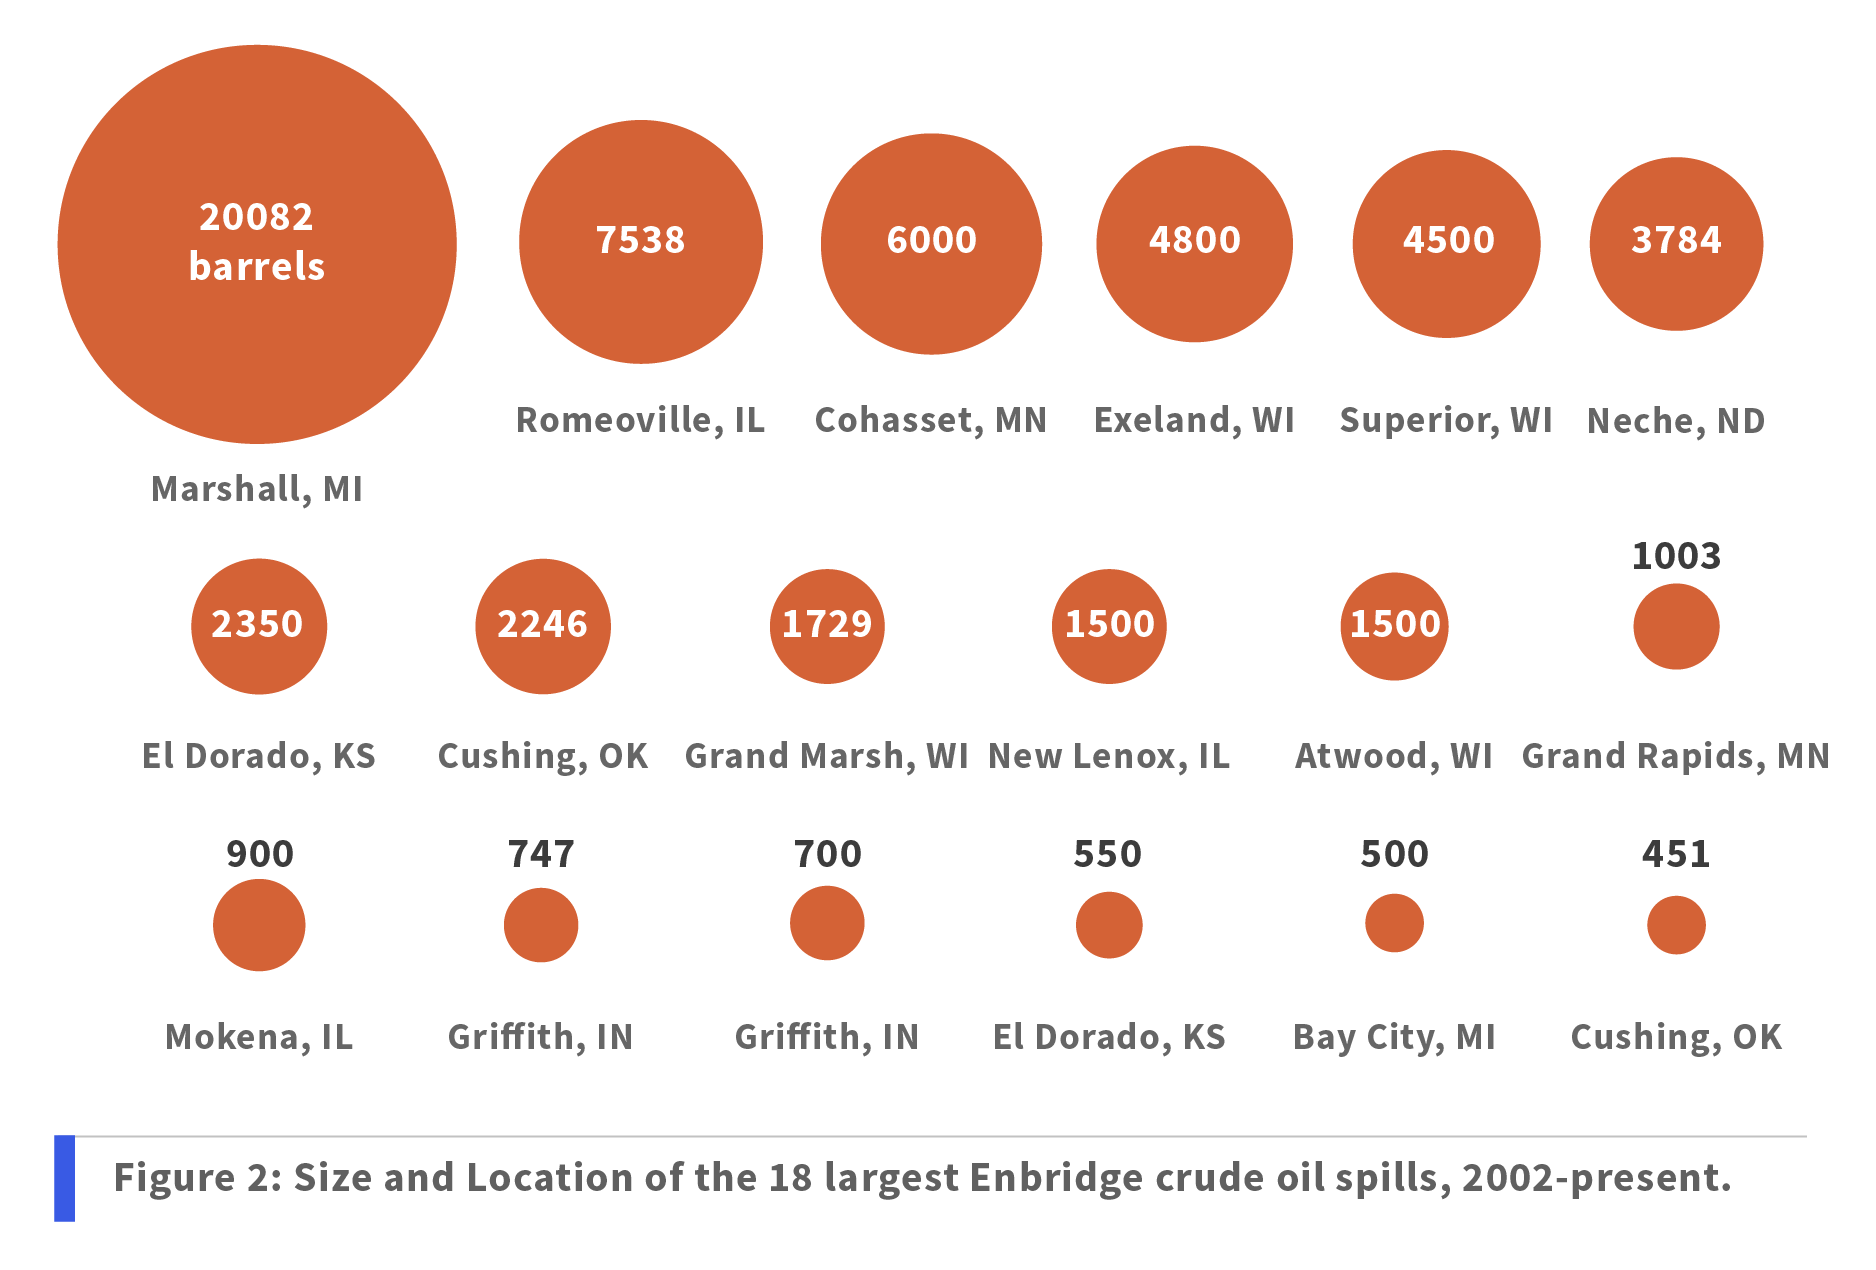 Figure 2: Size and Location of the 18 largest Enbridge crude oil spills, 2002-present.